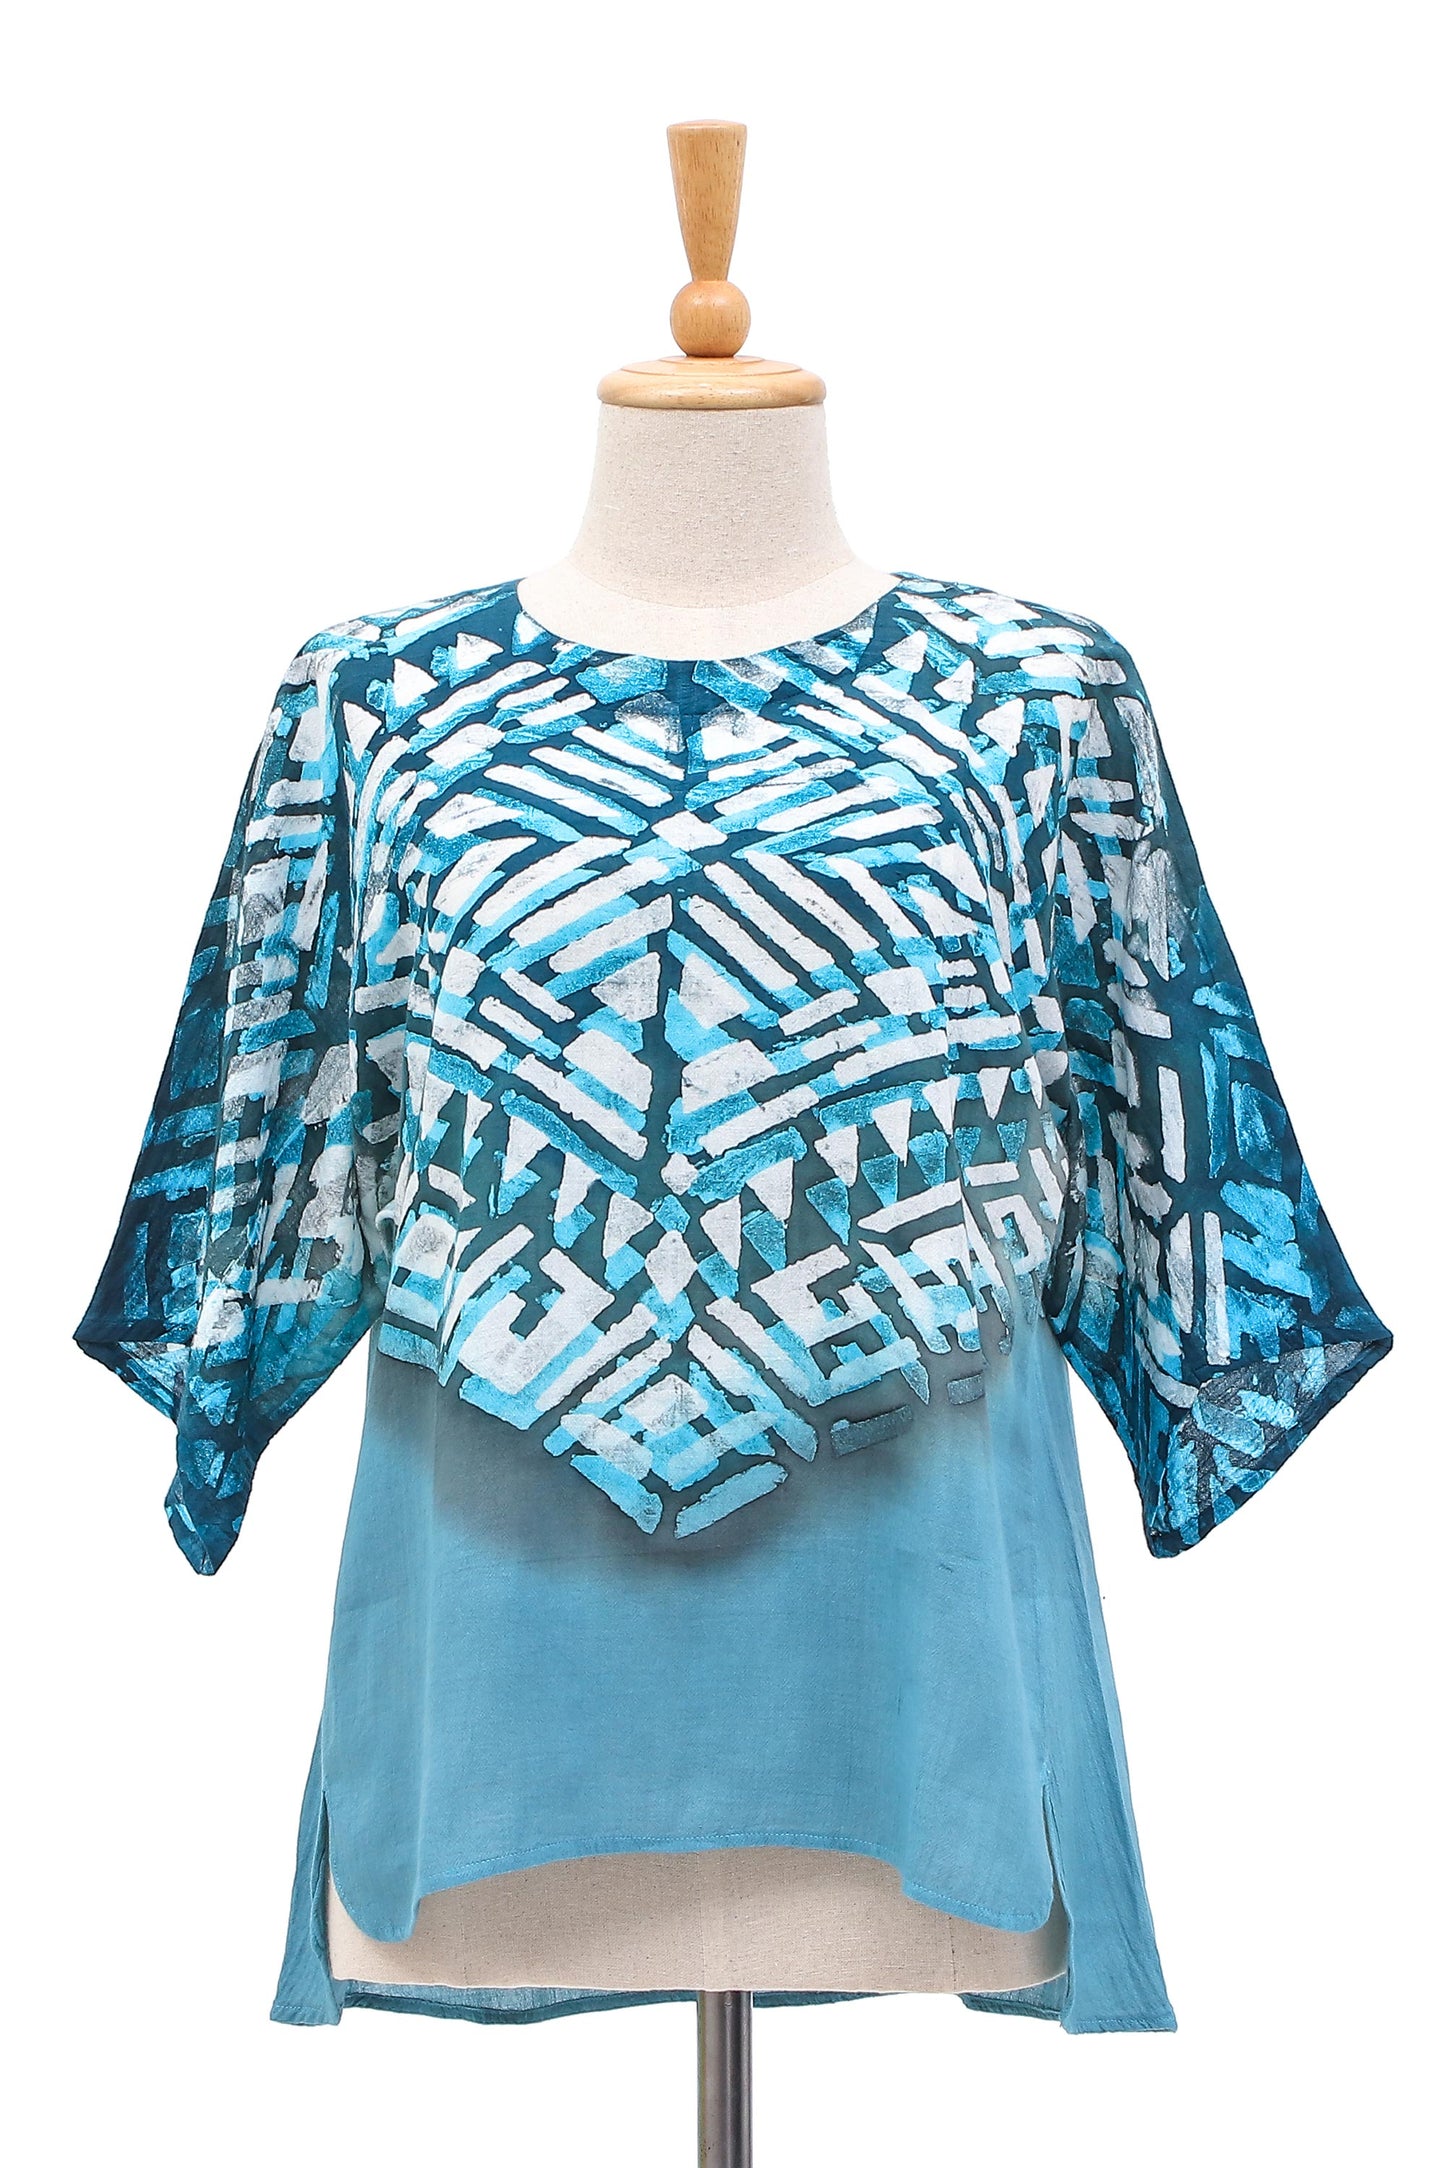 Blue Illusion Blue Cotton Batik Blouse Hand Crafted in Thailand